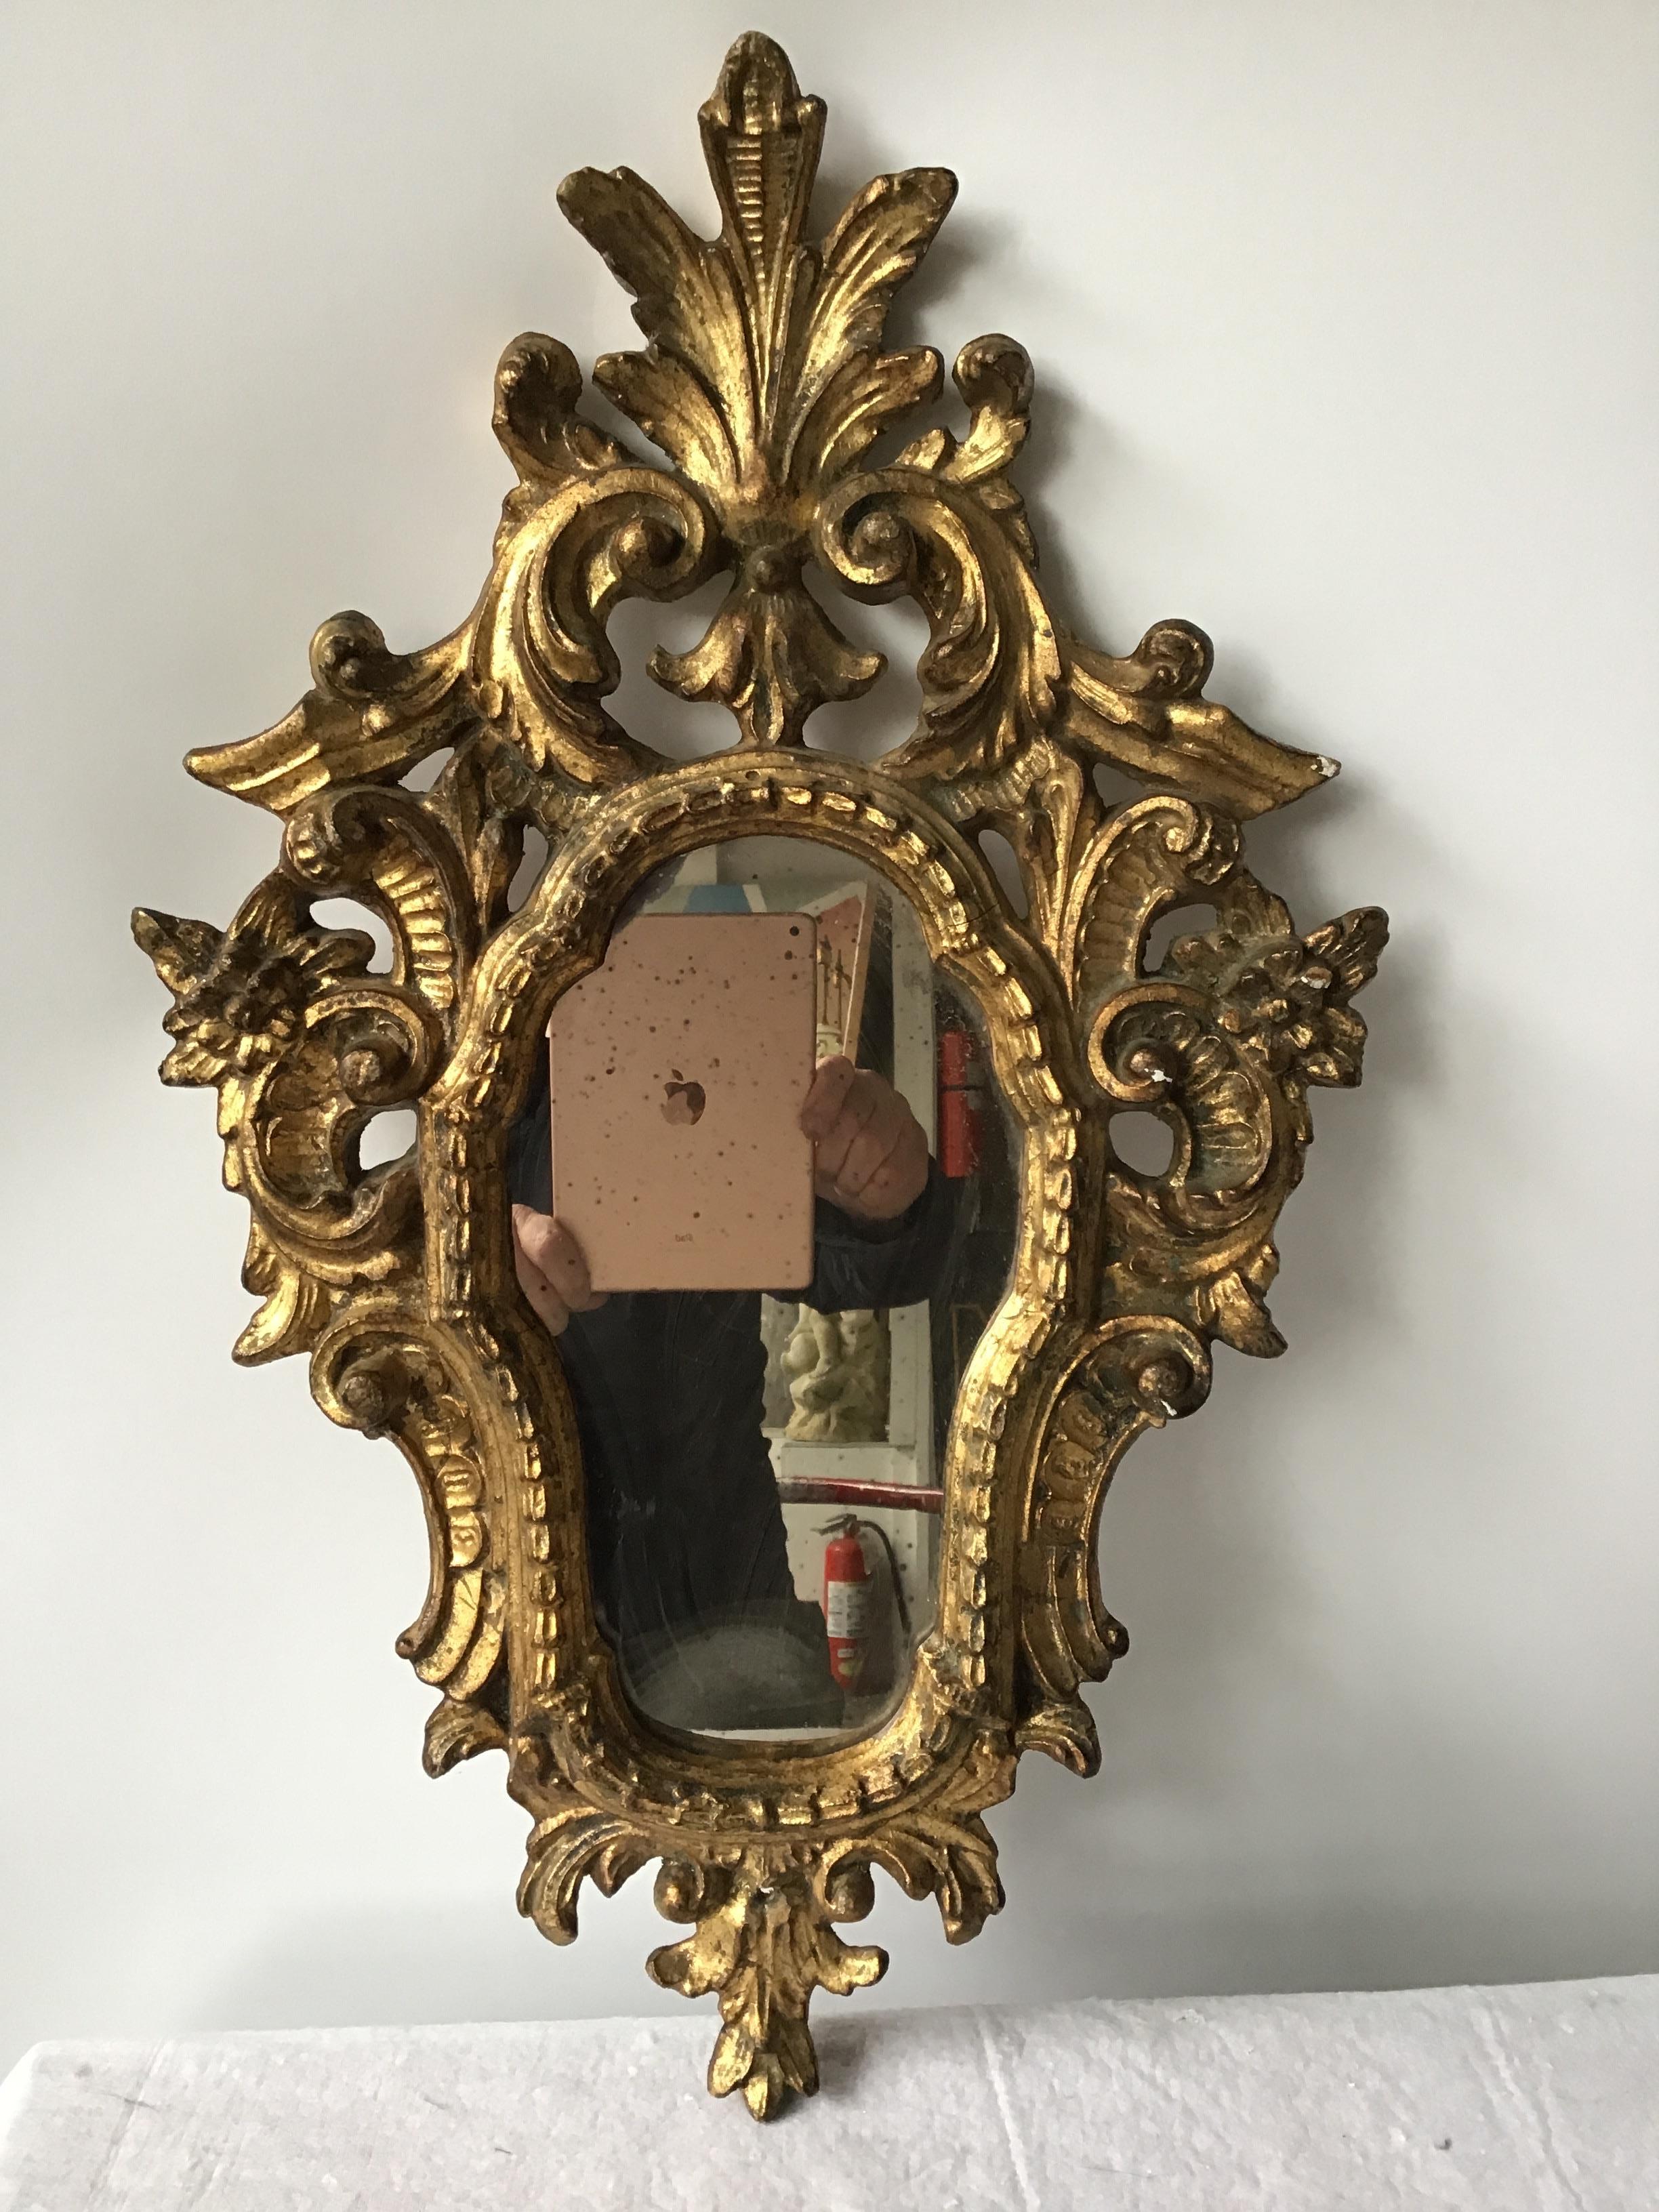 Small 1950s Italian hand carved giltwood mirror.
This item can be shipped via UPS.